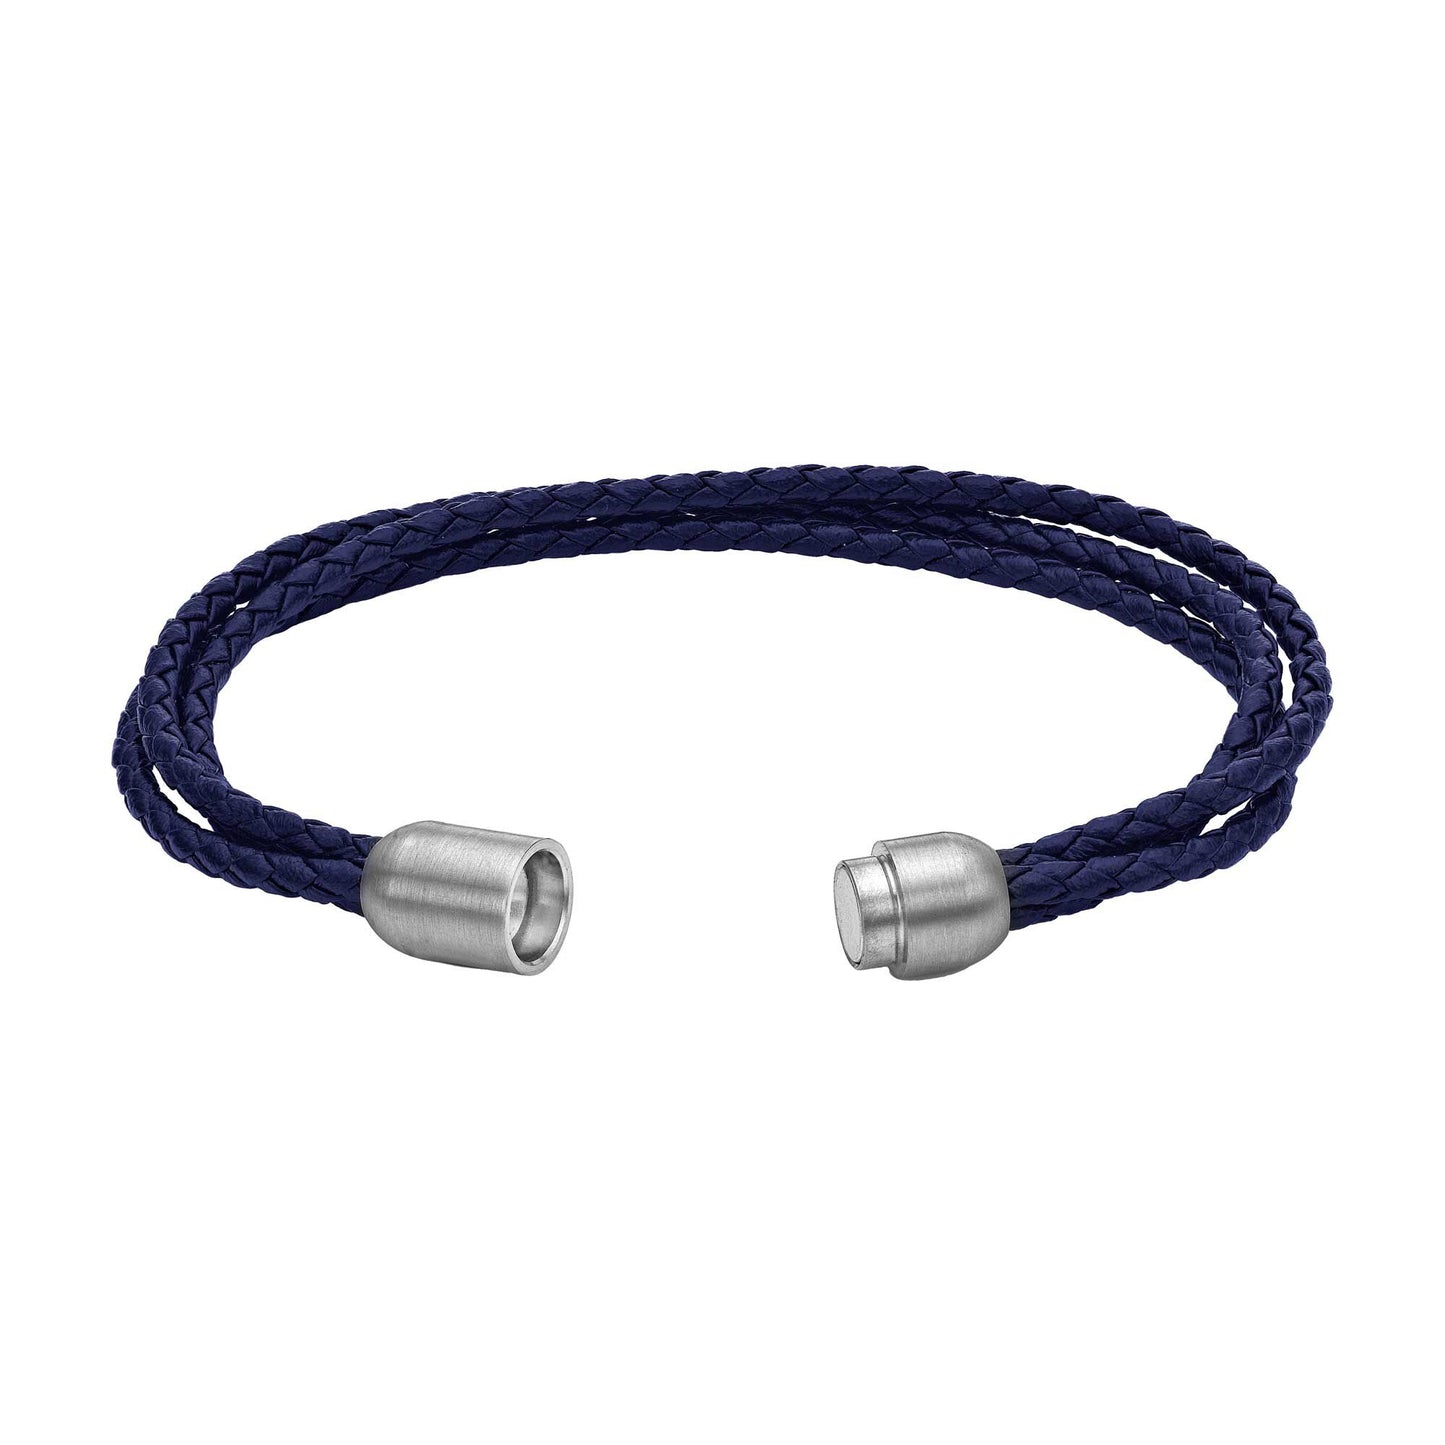 Brady Stainless Steel and Blue Leather Braided Bracelet